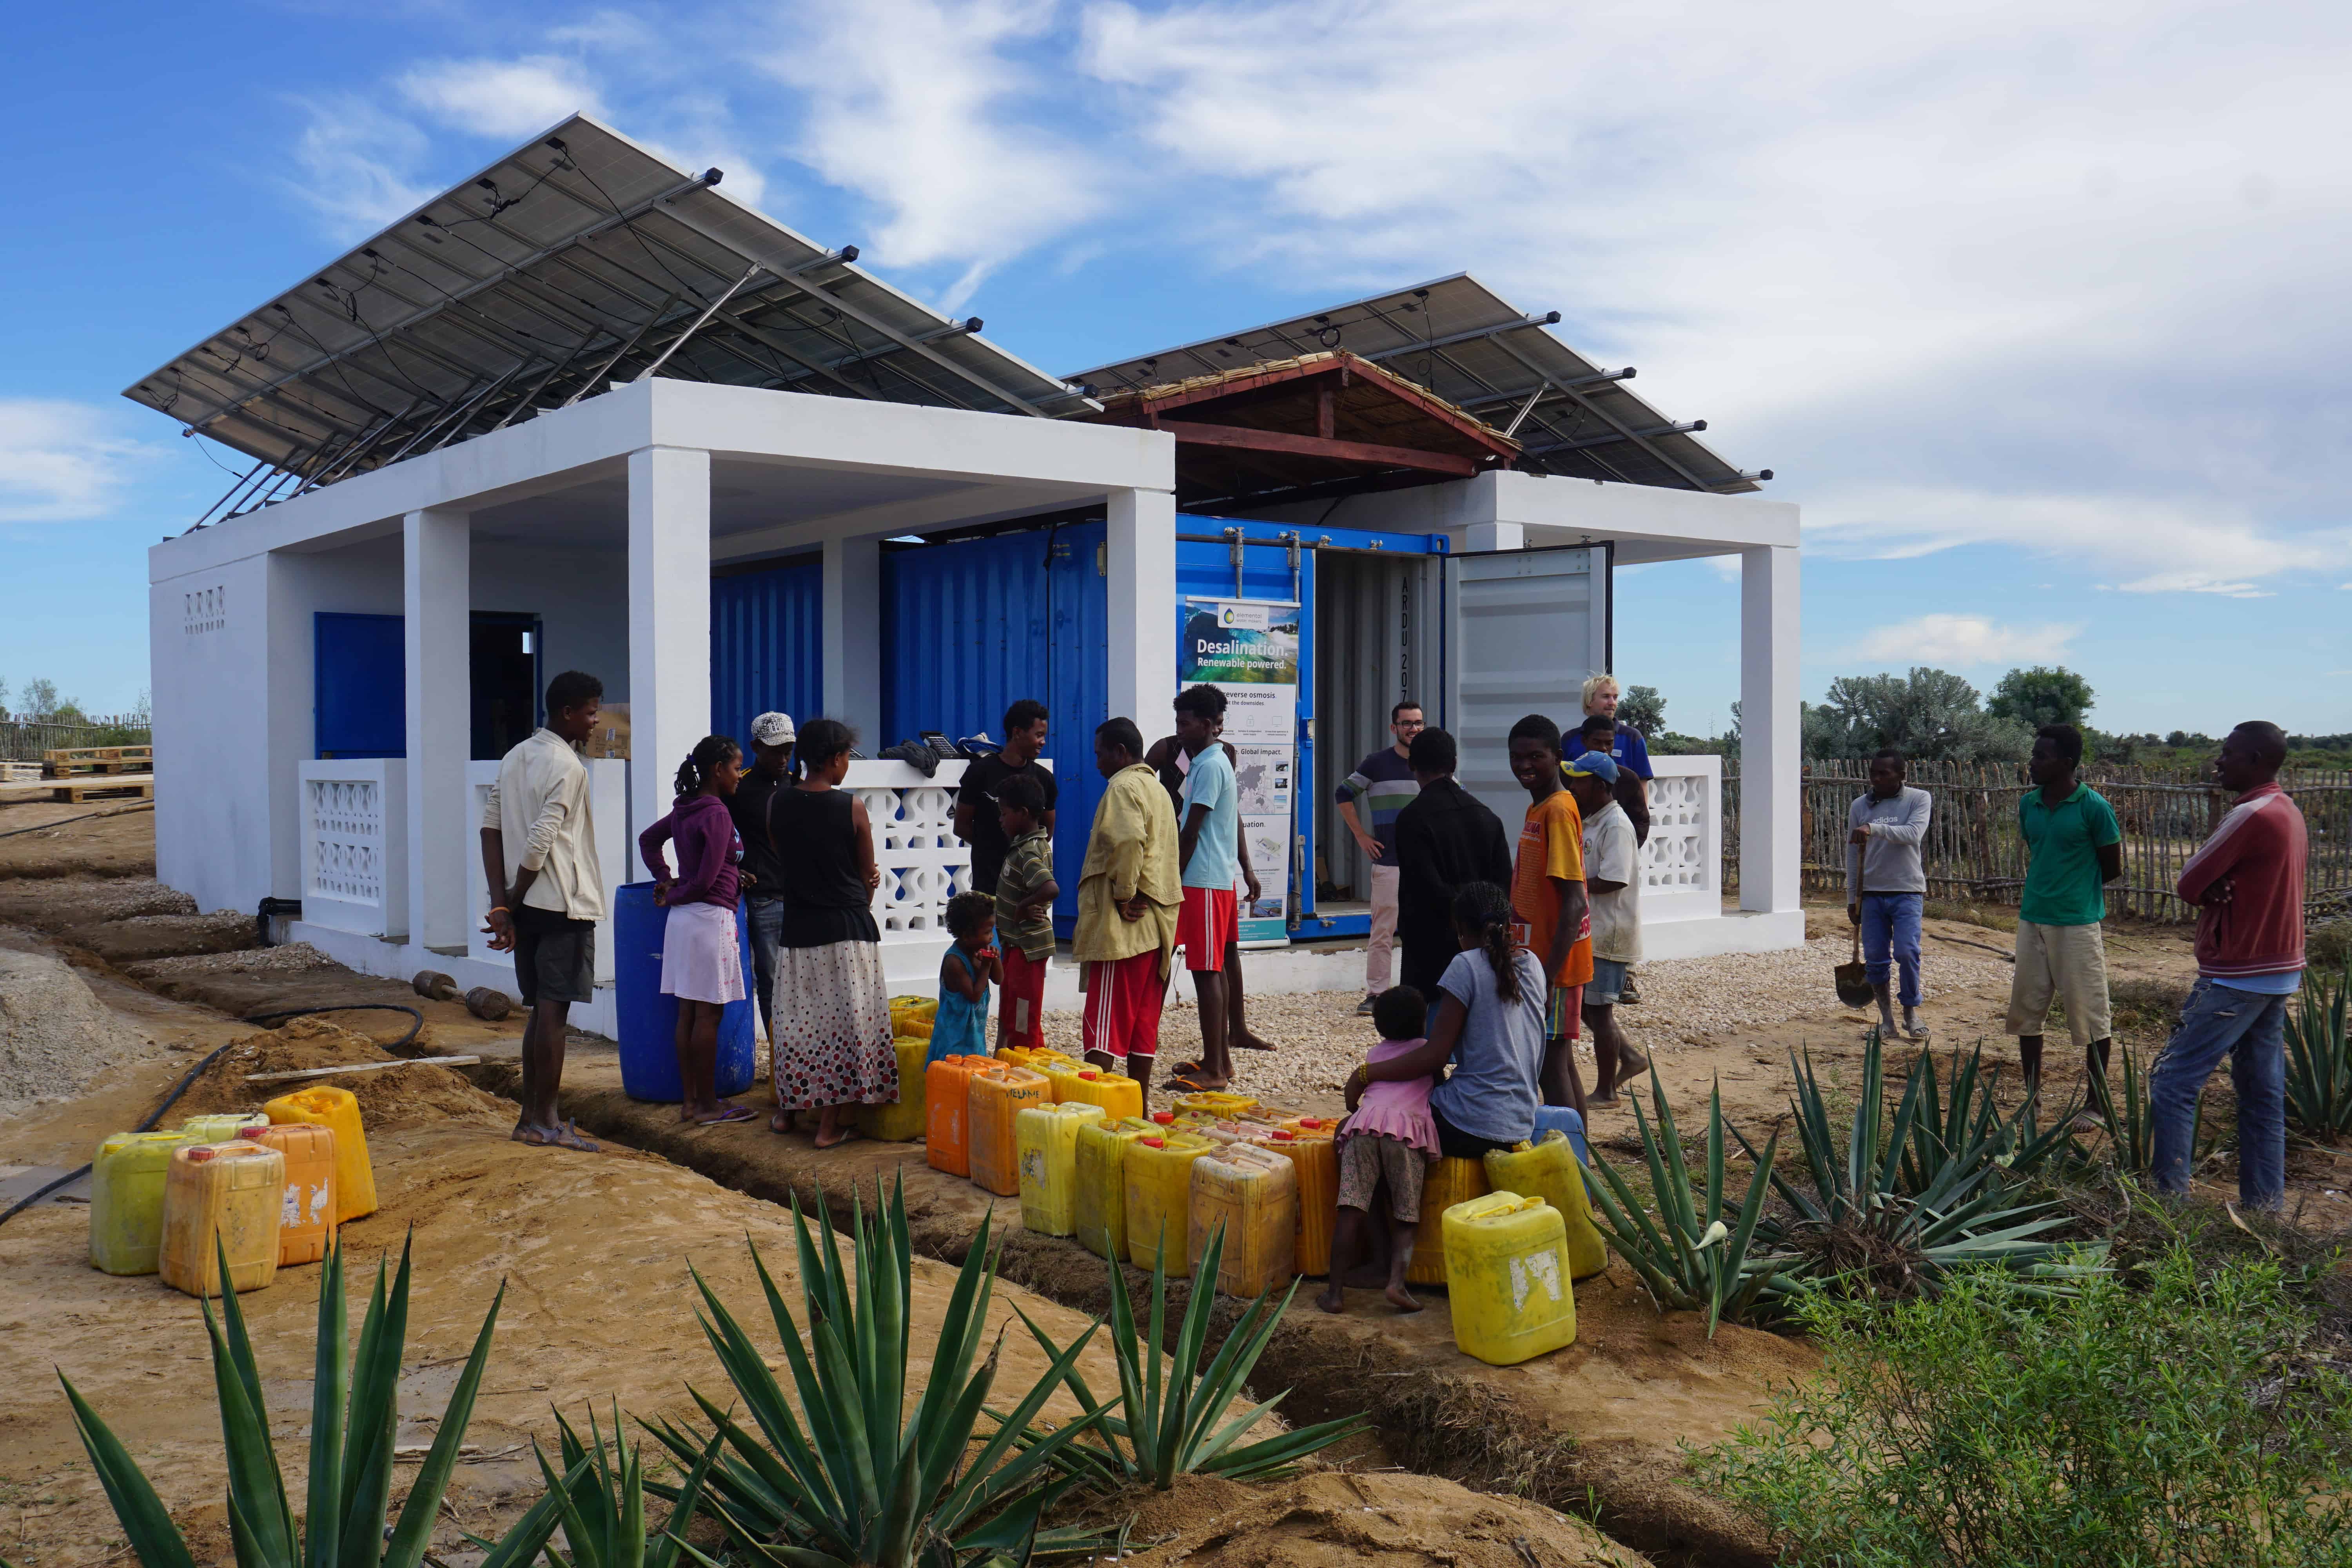 Villagers waiting for the desalination unit to be activated, building a queue in front of the container with their water tanks